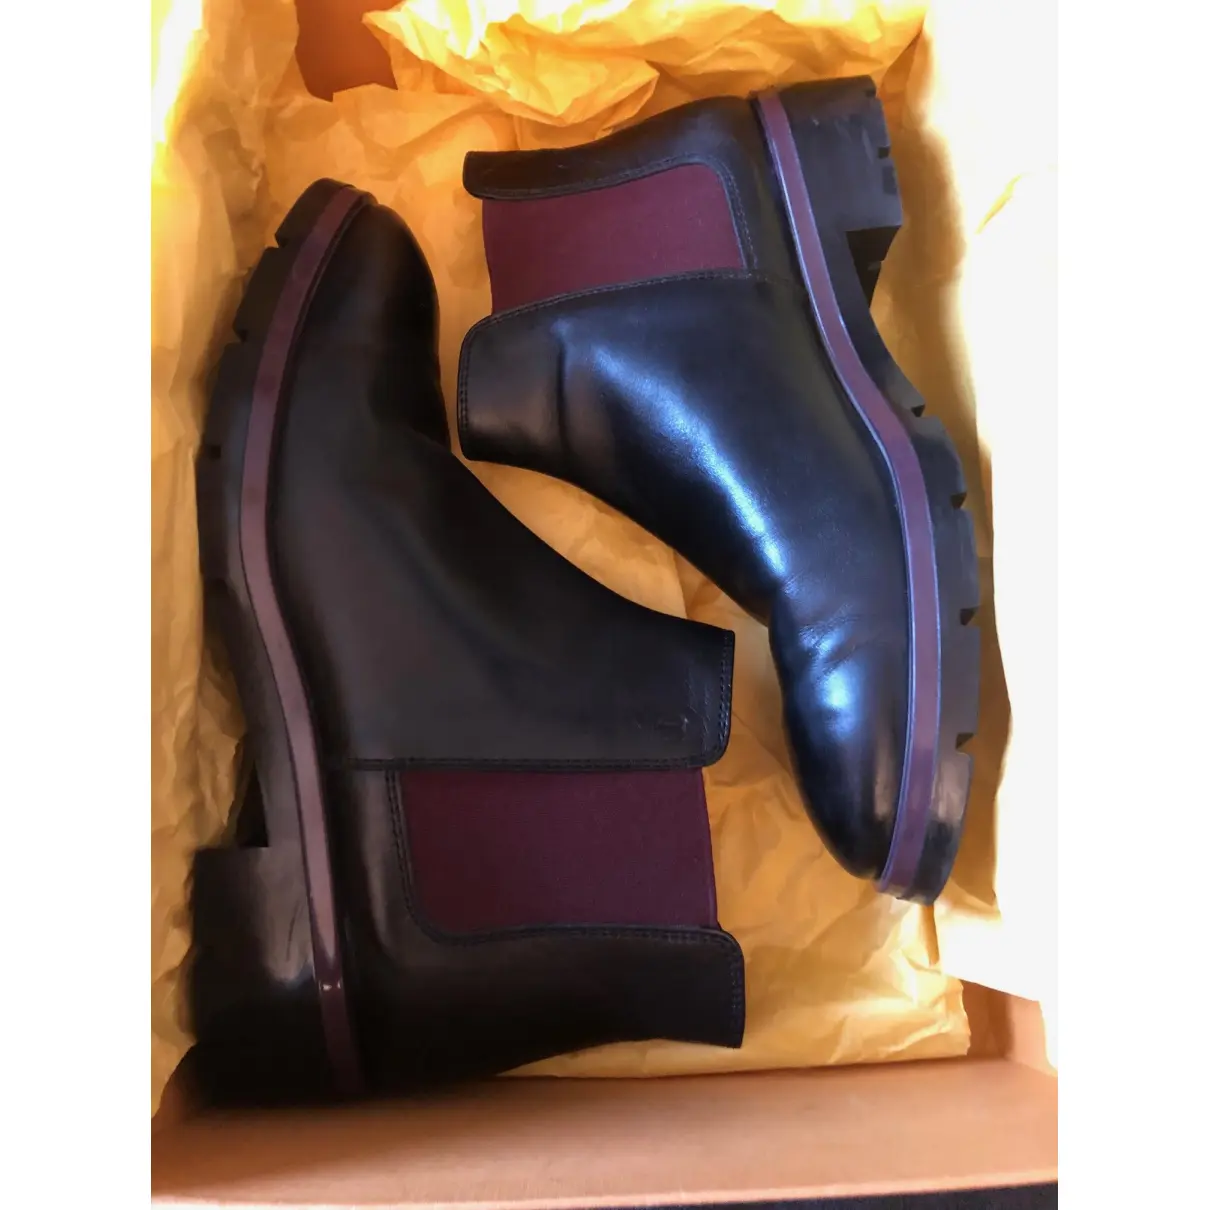 Buy Tod's Leather ankle boots online